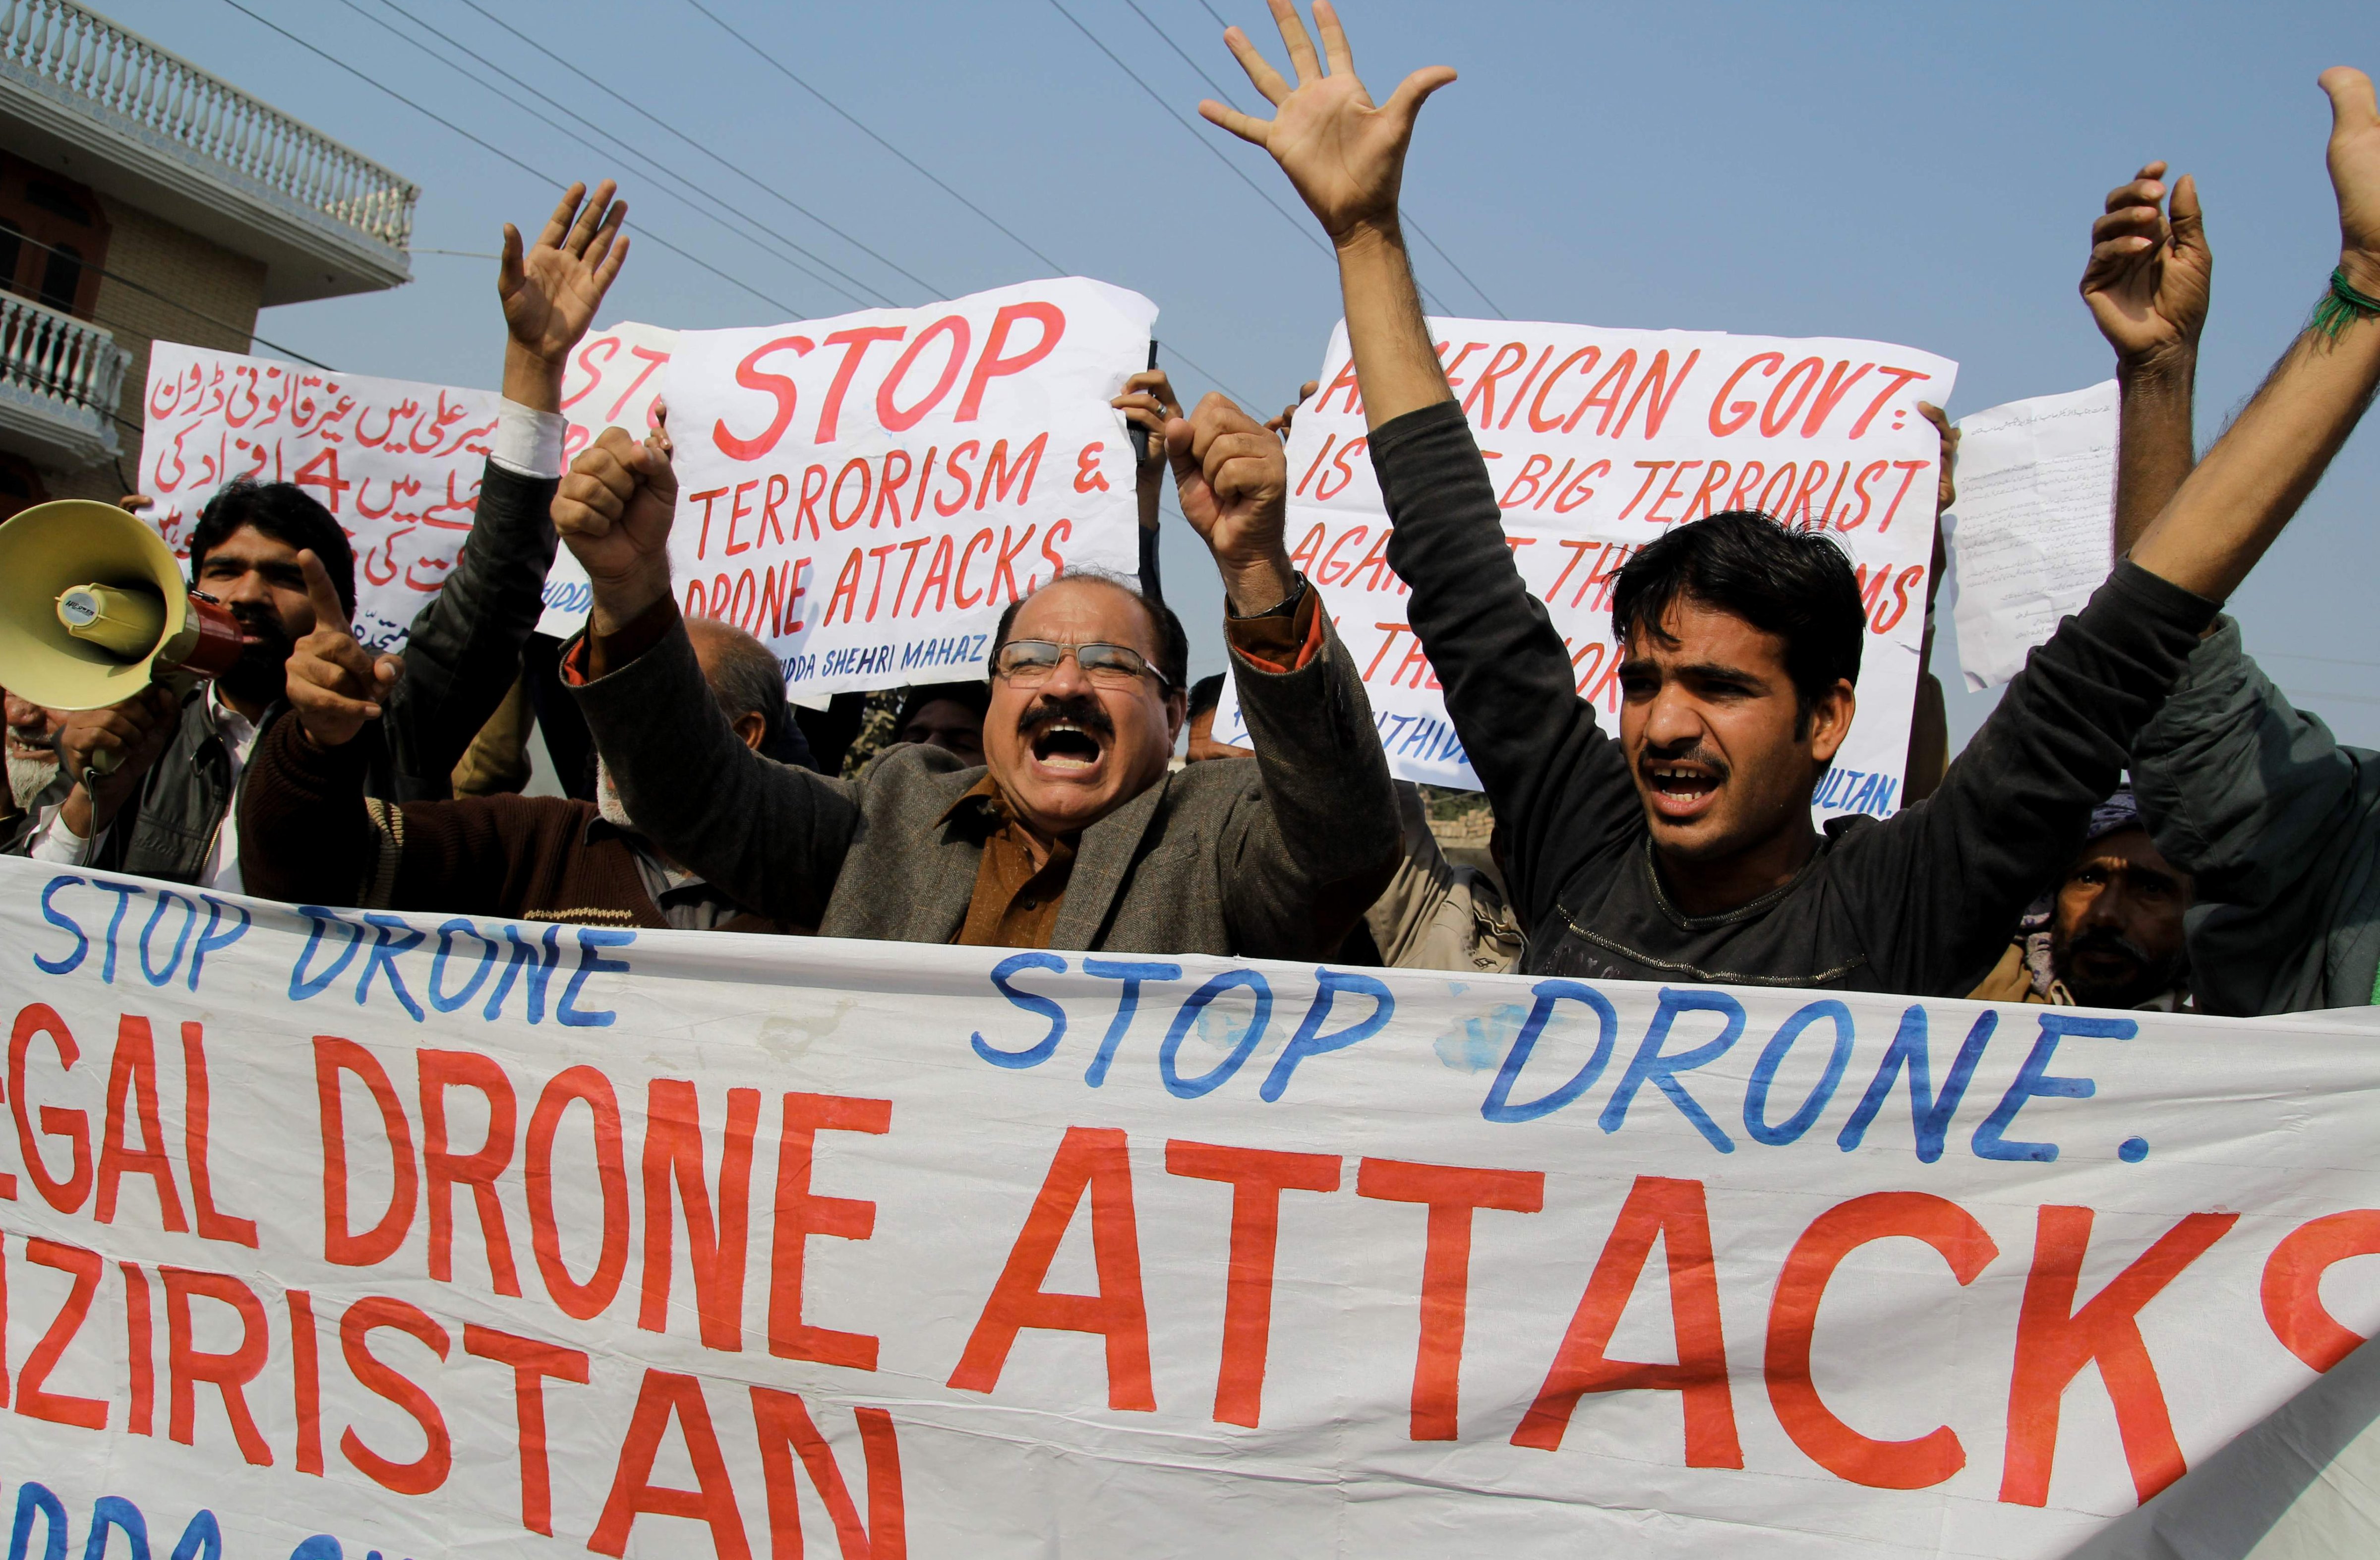 Activists shout slogans as they protest against a US drone attack in Multan, Pakistan on December 26, 2103. (S S MIRZA—AFP/Getty Images)